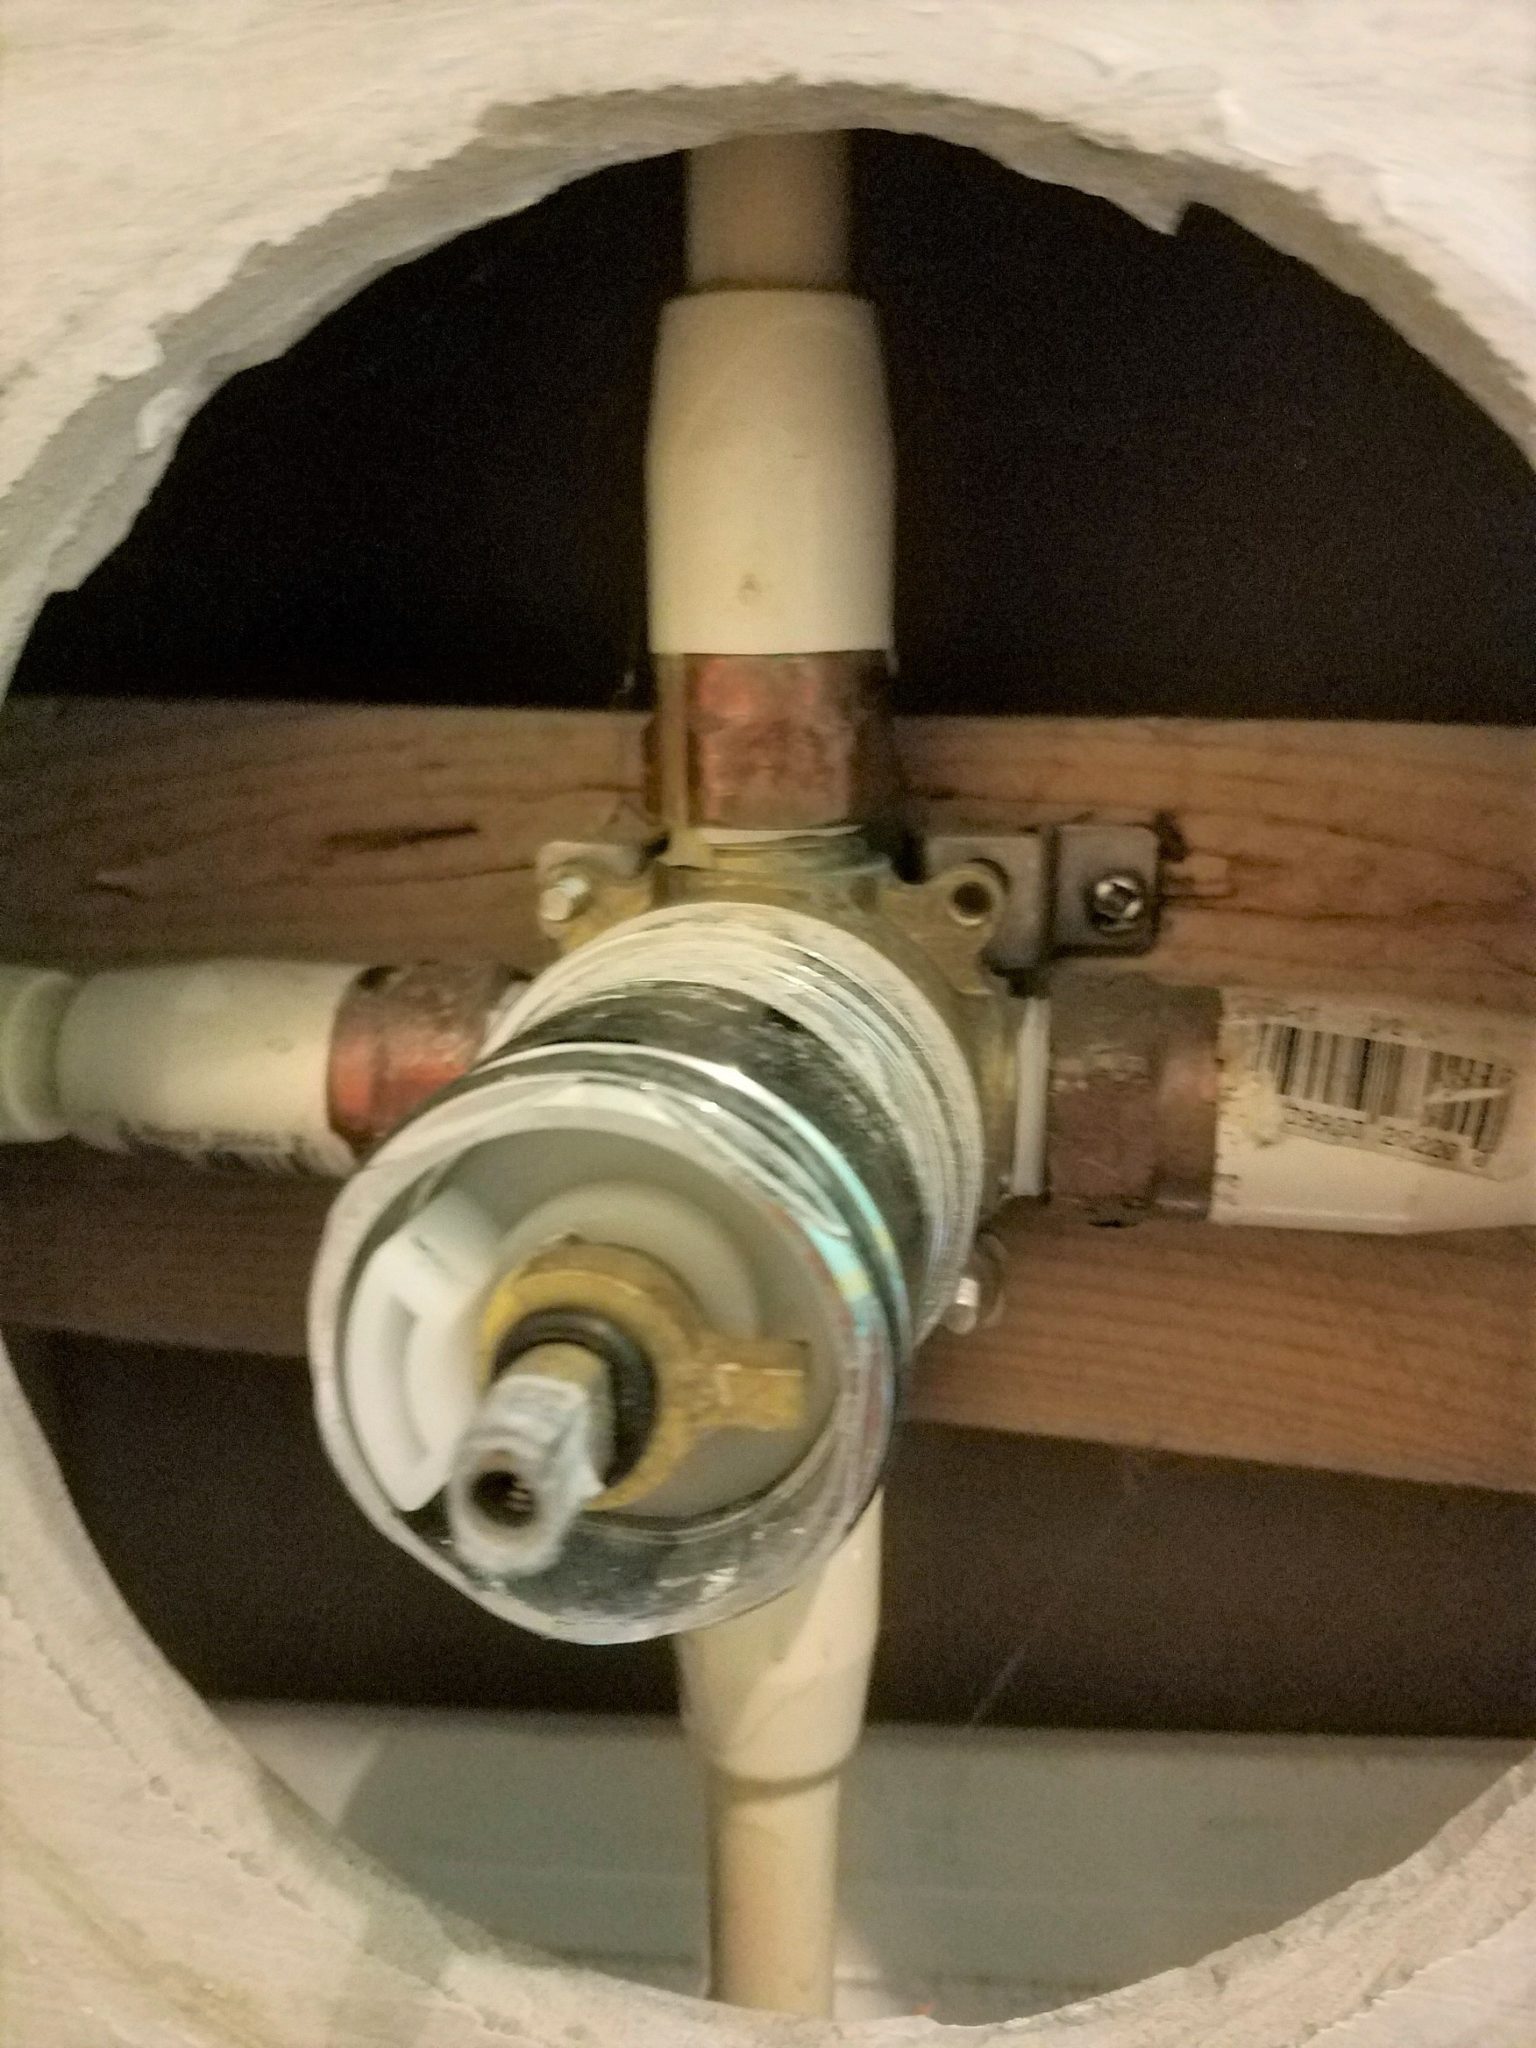 latch to secure pipes